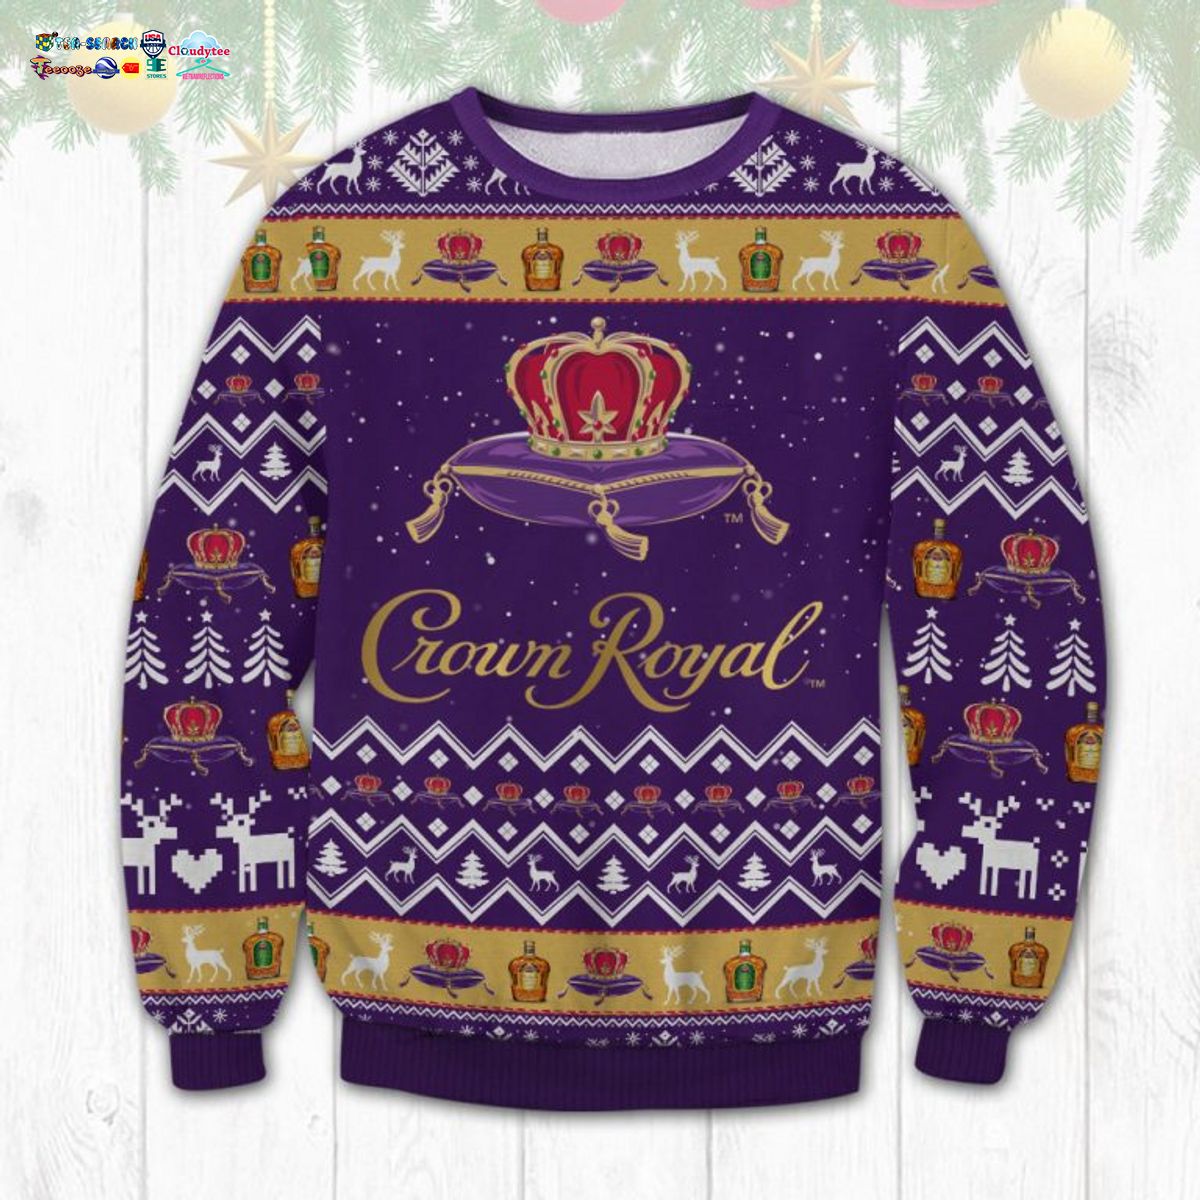 Crown Royal Ver 4 Ugly Christmas Sweater - Elegant and sober Pic